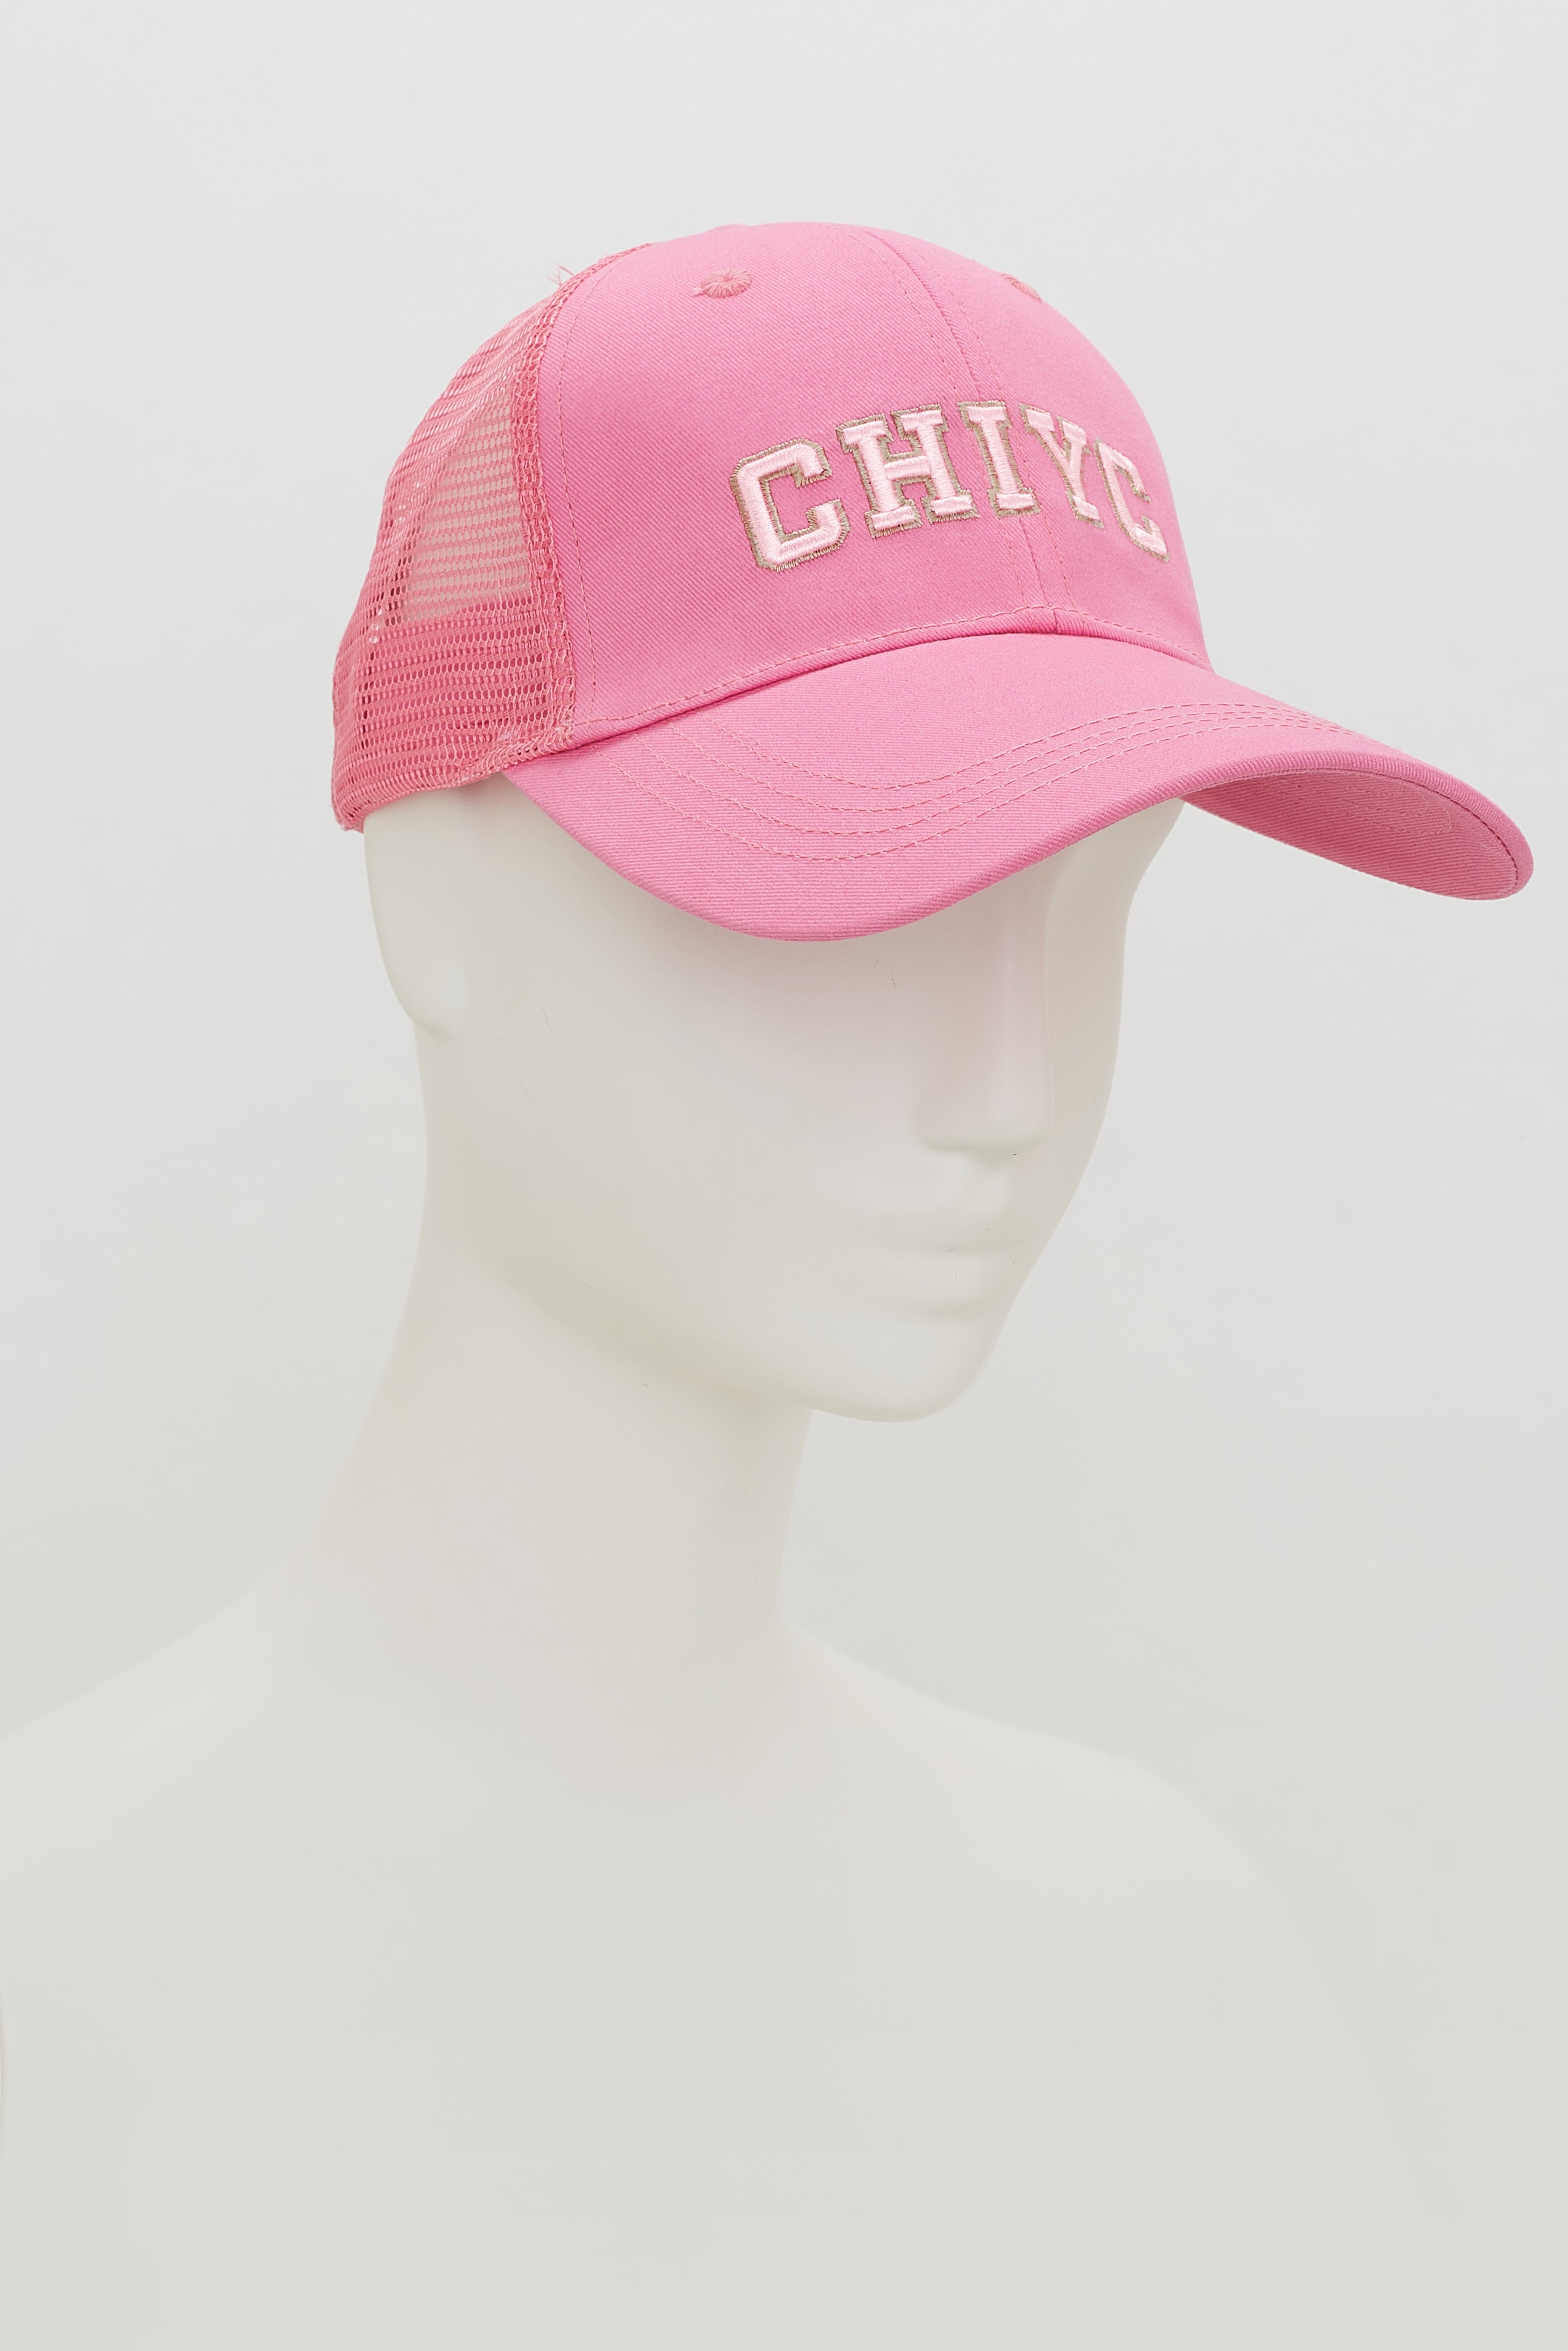 Dorothee-Schumacher-OUTLET-SALE-CHIYC-baseball-cap-Accessoires-OS-shaded-pink-2.jpg